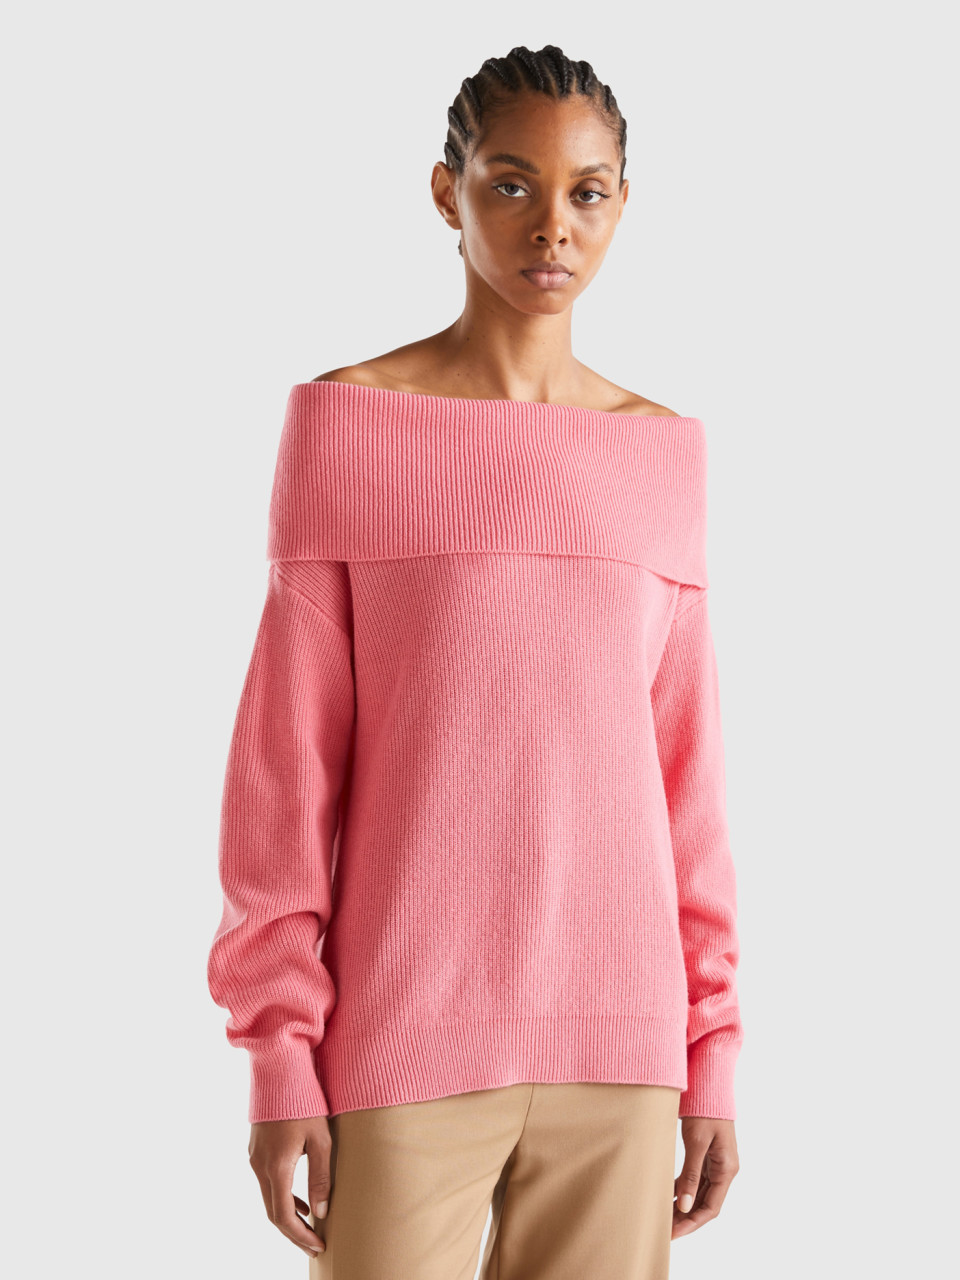 Benetton, Sweater With Bare Shoulders, Salmon, Women